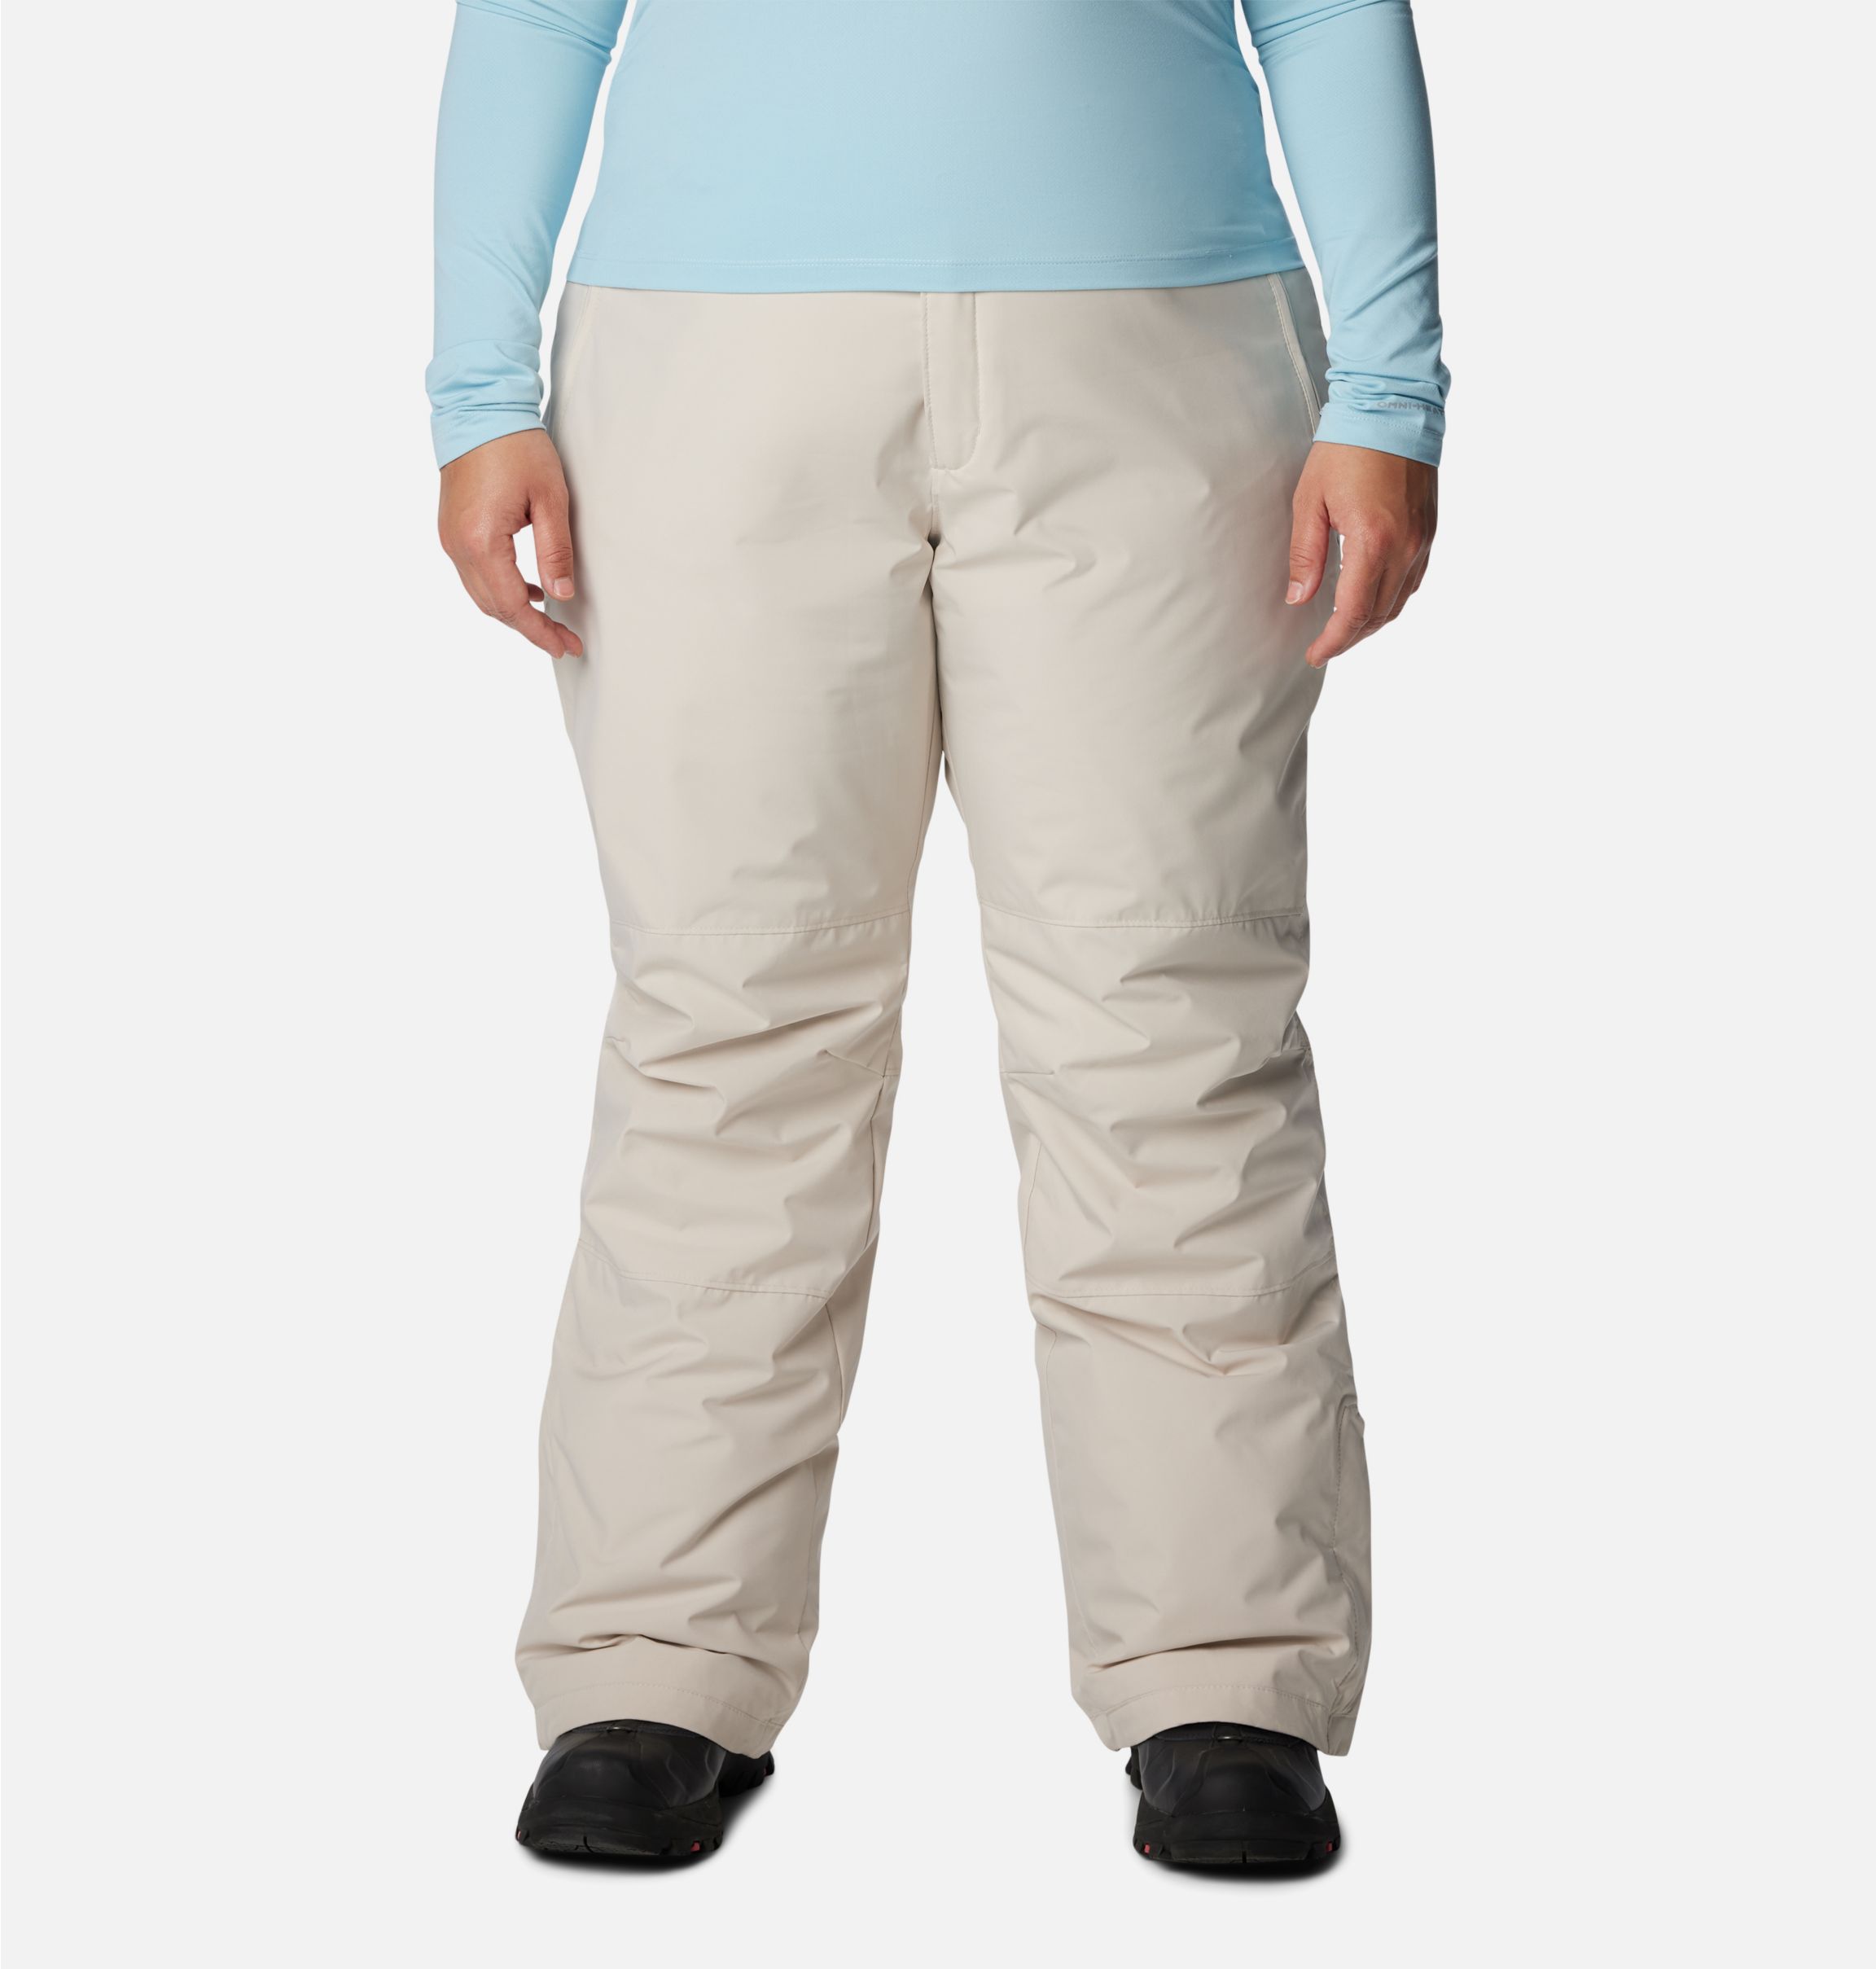 Columbia Snow Pants, Bugaboo Omni-Heat, Ladies - Time-Out Sports